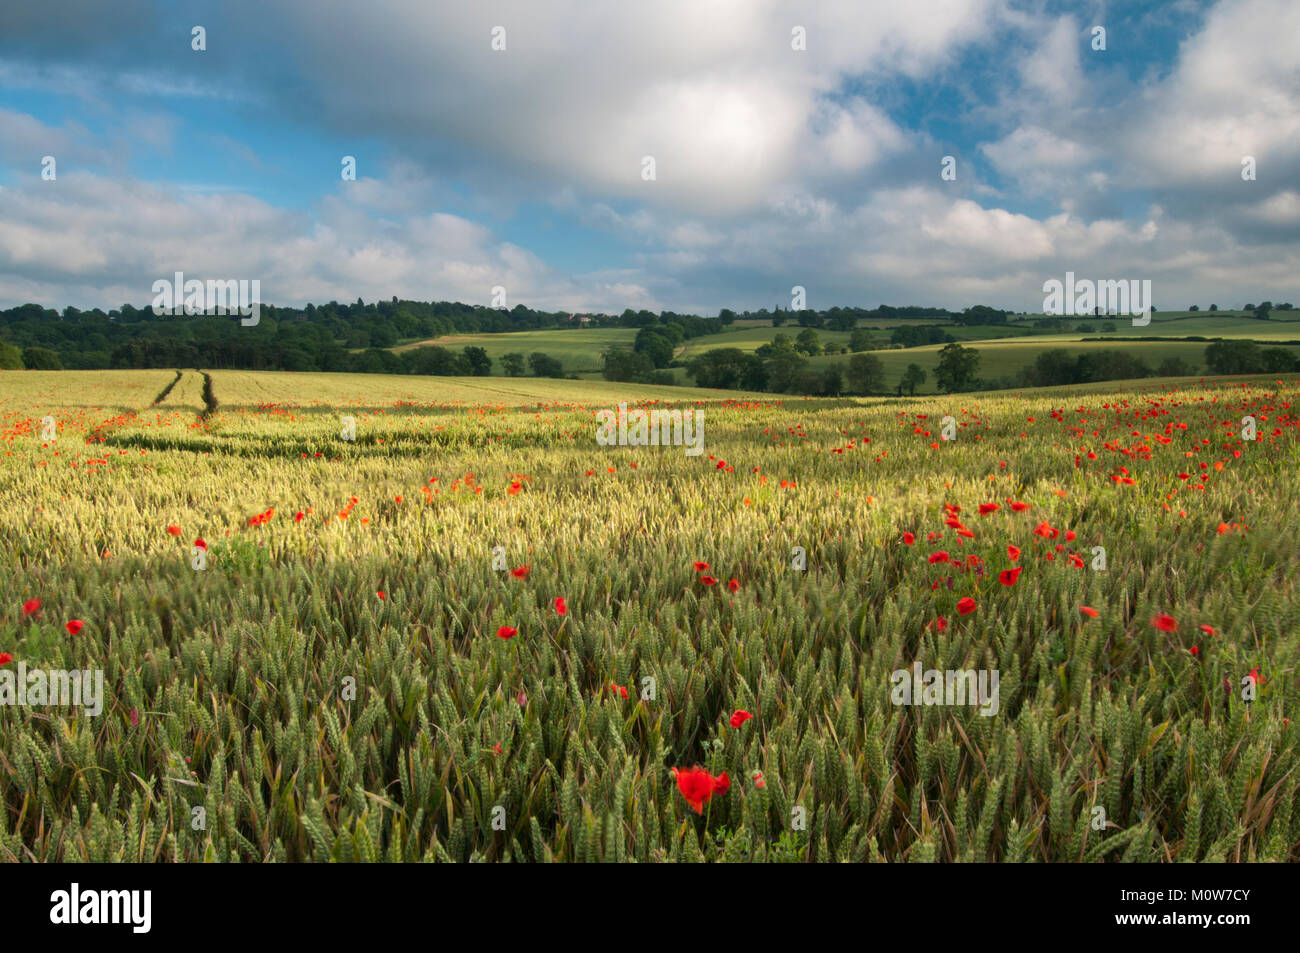 A field of ripening wheat studded with vibrant red poppies on a July evening near Ravensthorpe, looking towards East Haddon, Northamptonshire, England Stock Photo